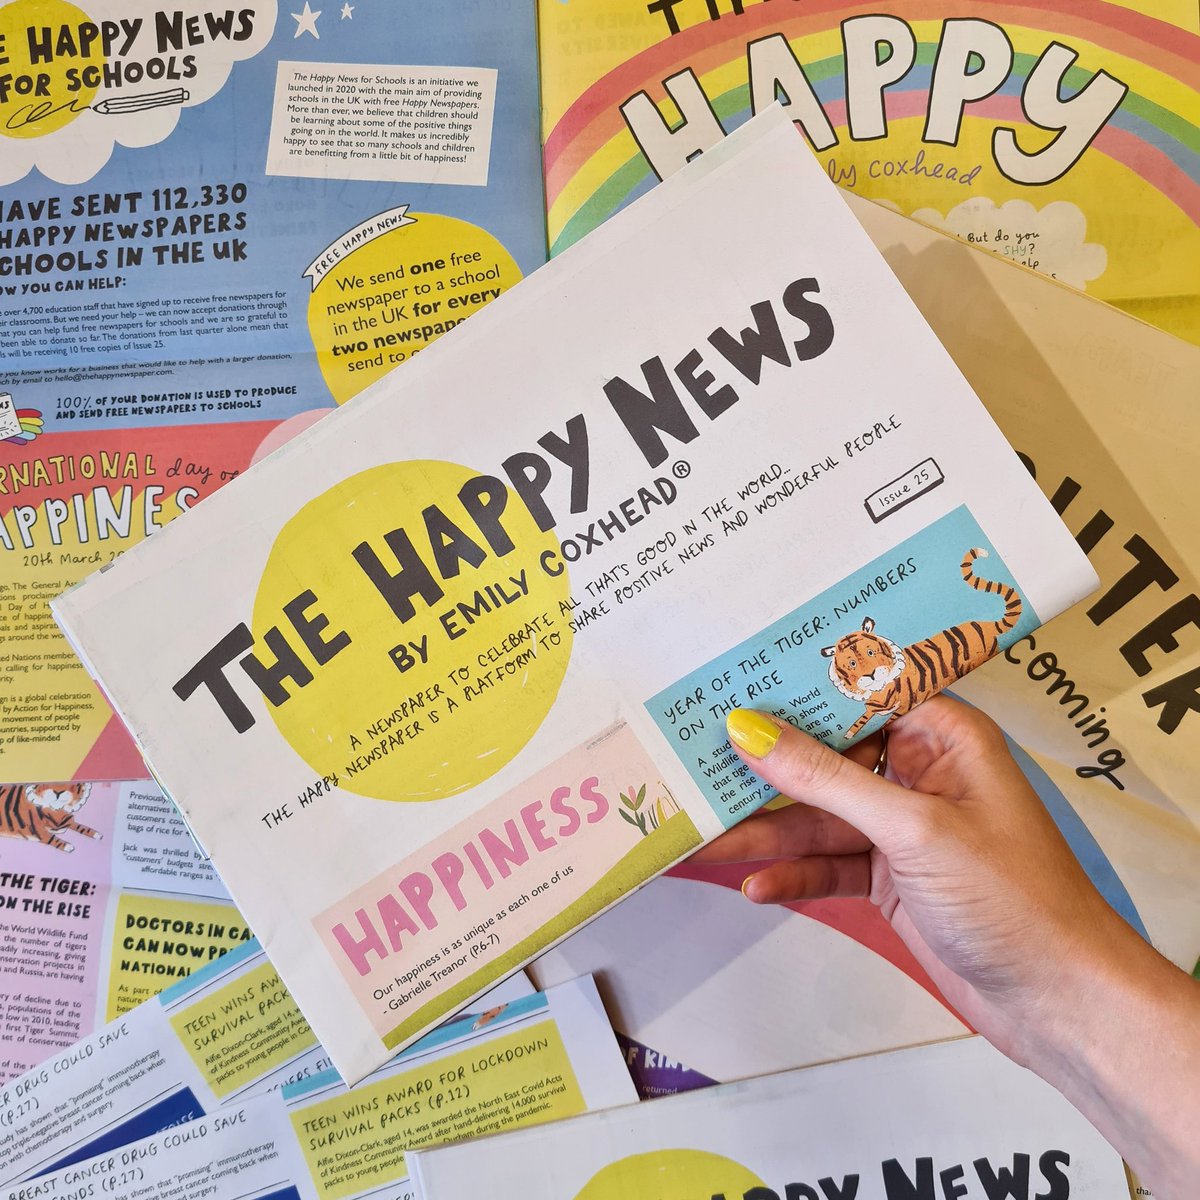 💛 Issue 25 💛 Can you believe we're on the 25th instalment of @HappyNewspaper_ ?! This gorgeous quarterly paper is pure sunshine 🌞 and the latest issue has just landed! Find us on the 2nd floor of @Afflecksfox to grab your copy ✨️ #TheHappyNews #GoodNews #HappyNewspaper